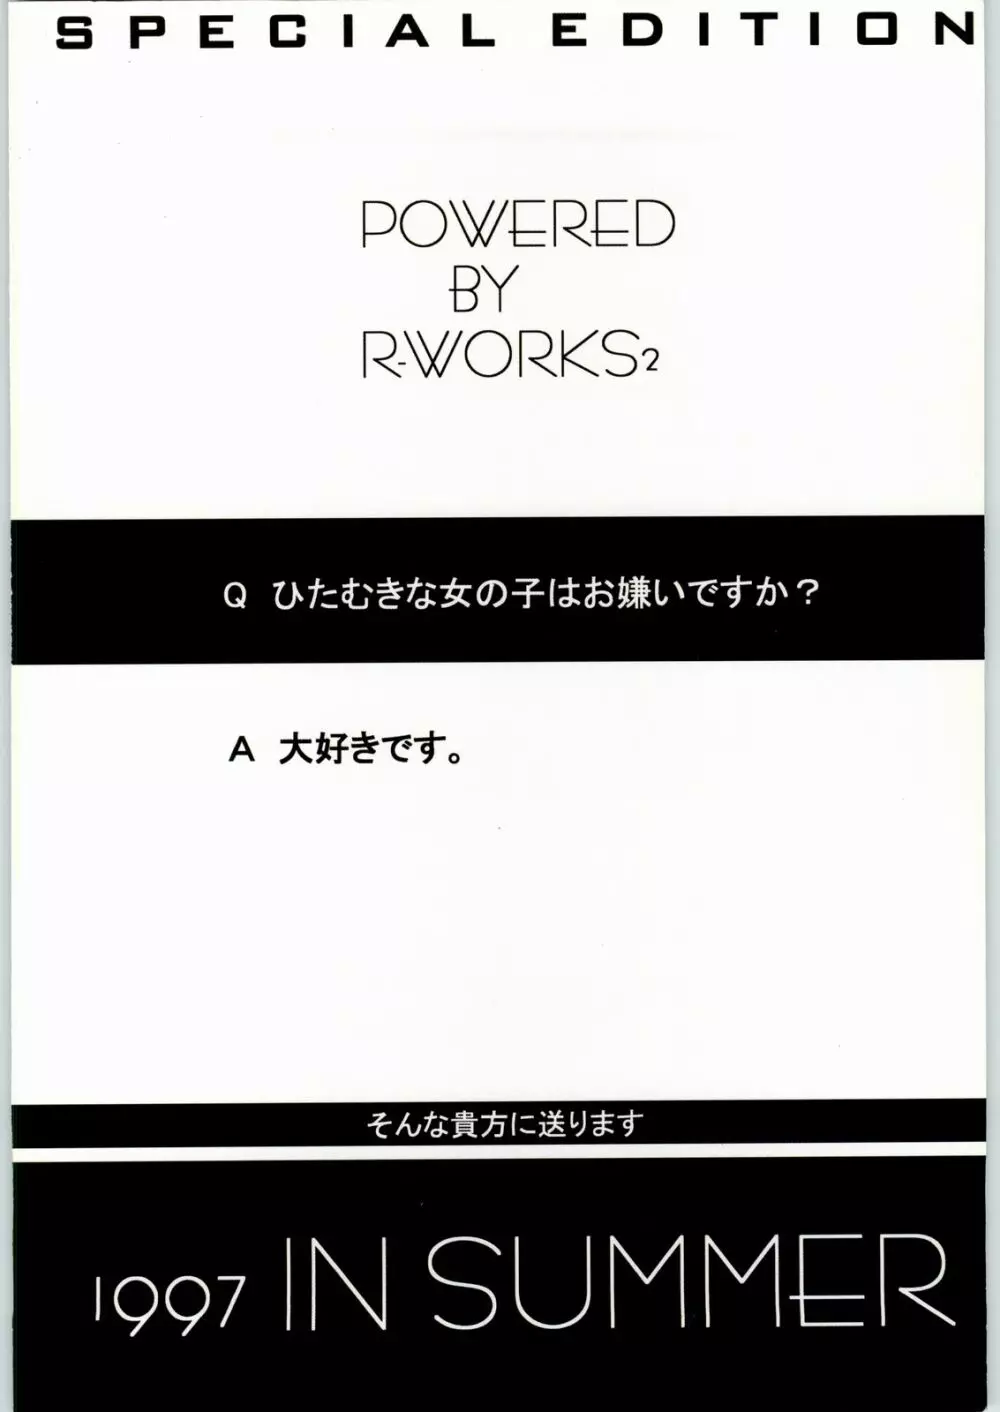 POWERED BY R-WORKS II 美少女恋愛ゲーム特集 SPCIAL EDITION 62ページ